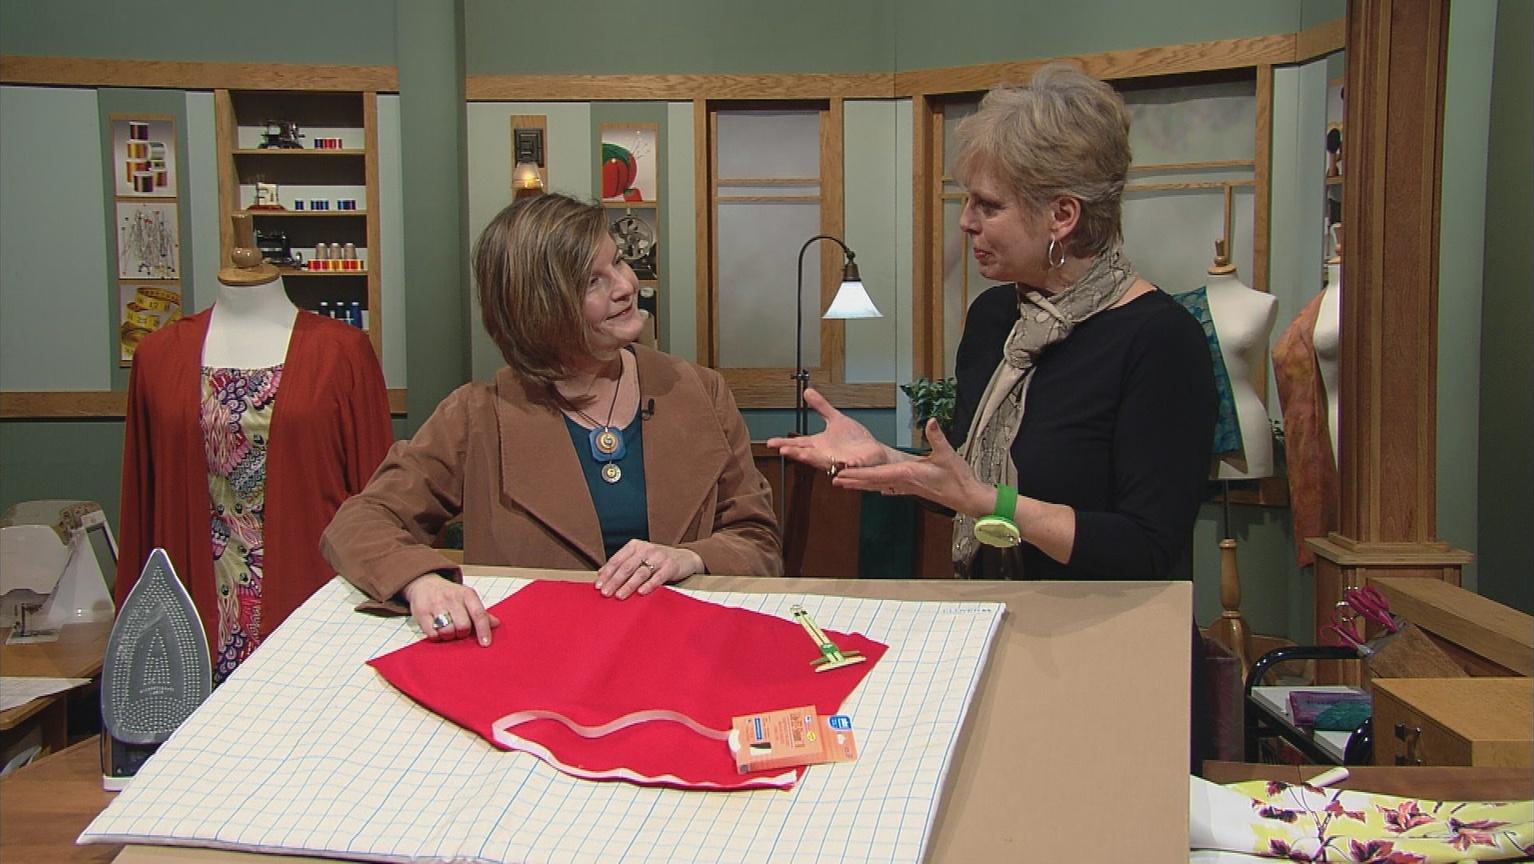 Sewing With Nancy: Season 2800 Episodes | SCETV